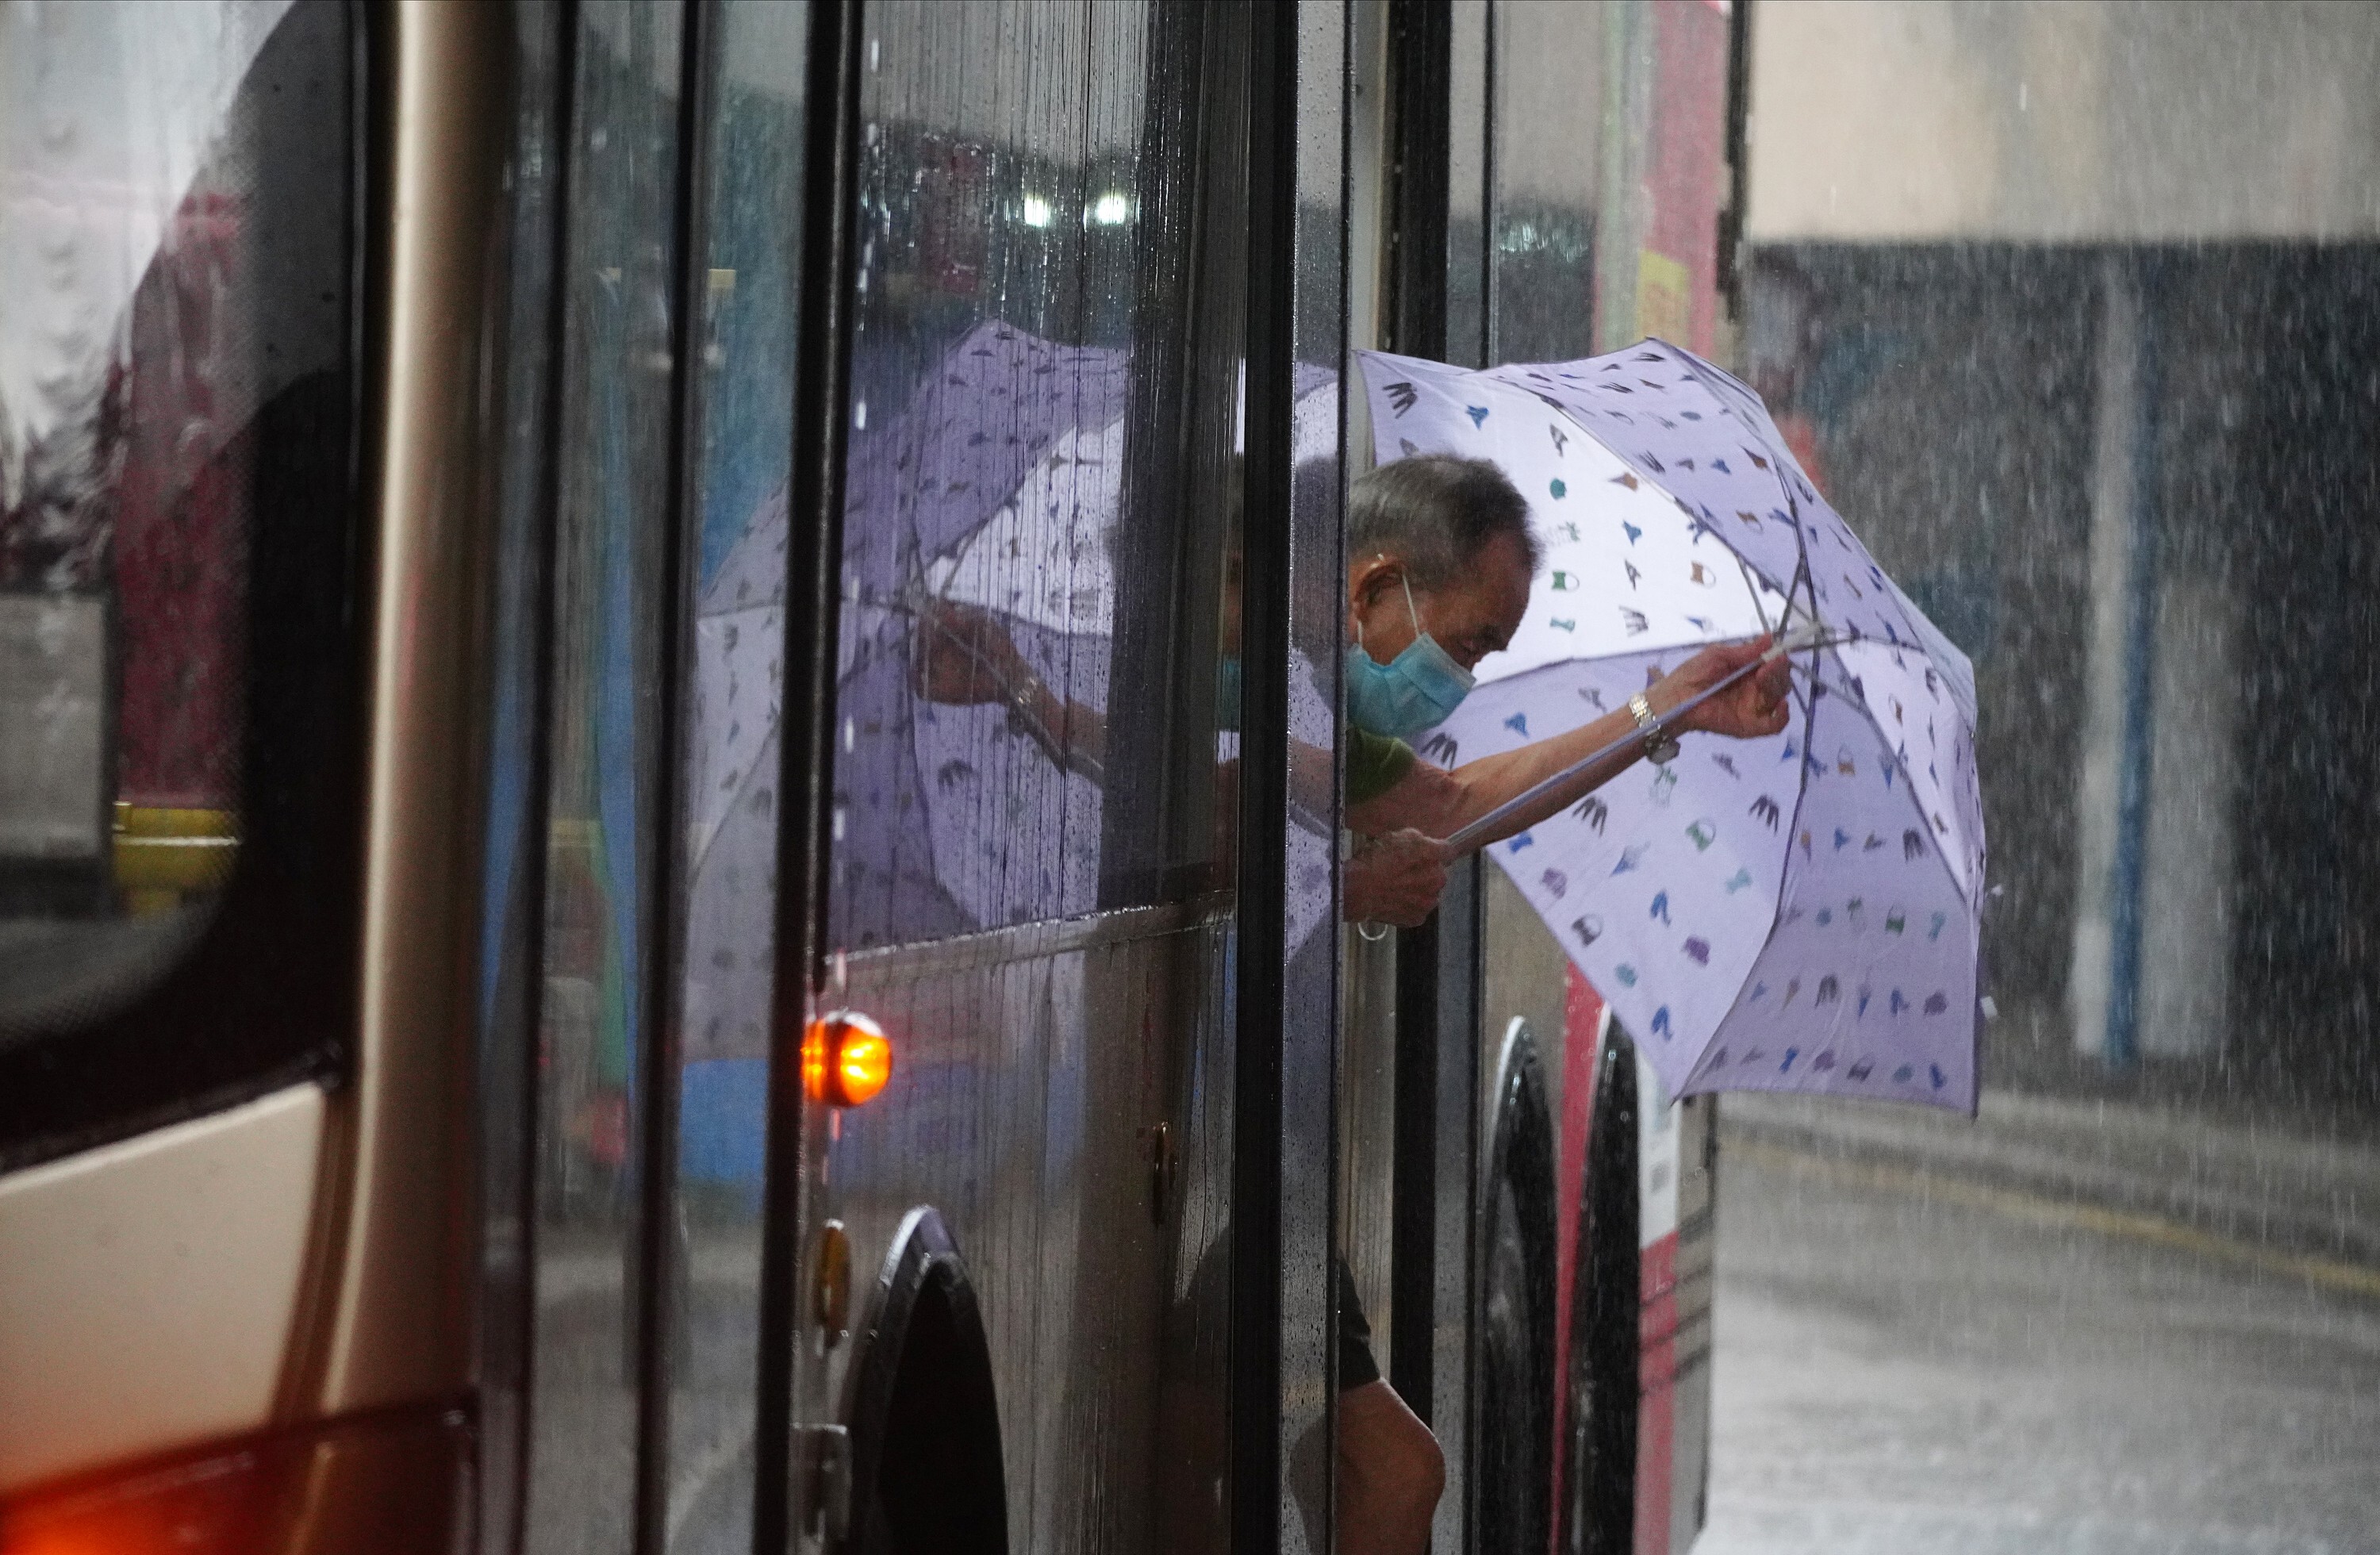 An elderly man steps off a bus into the rain in Tsim Sha Tsui. Financial service providers need to redesign products to make it easier for people to understand their financial position. Photo: Sam Tsang